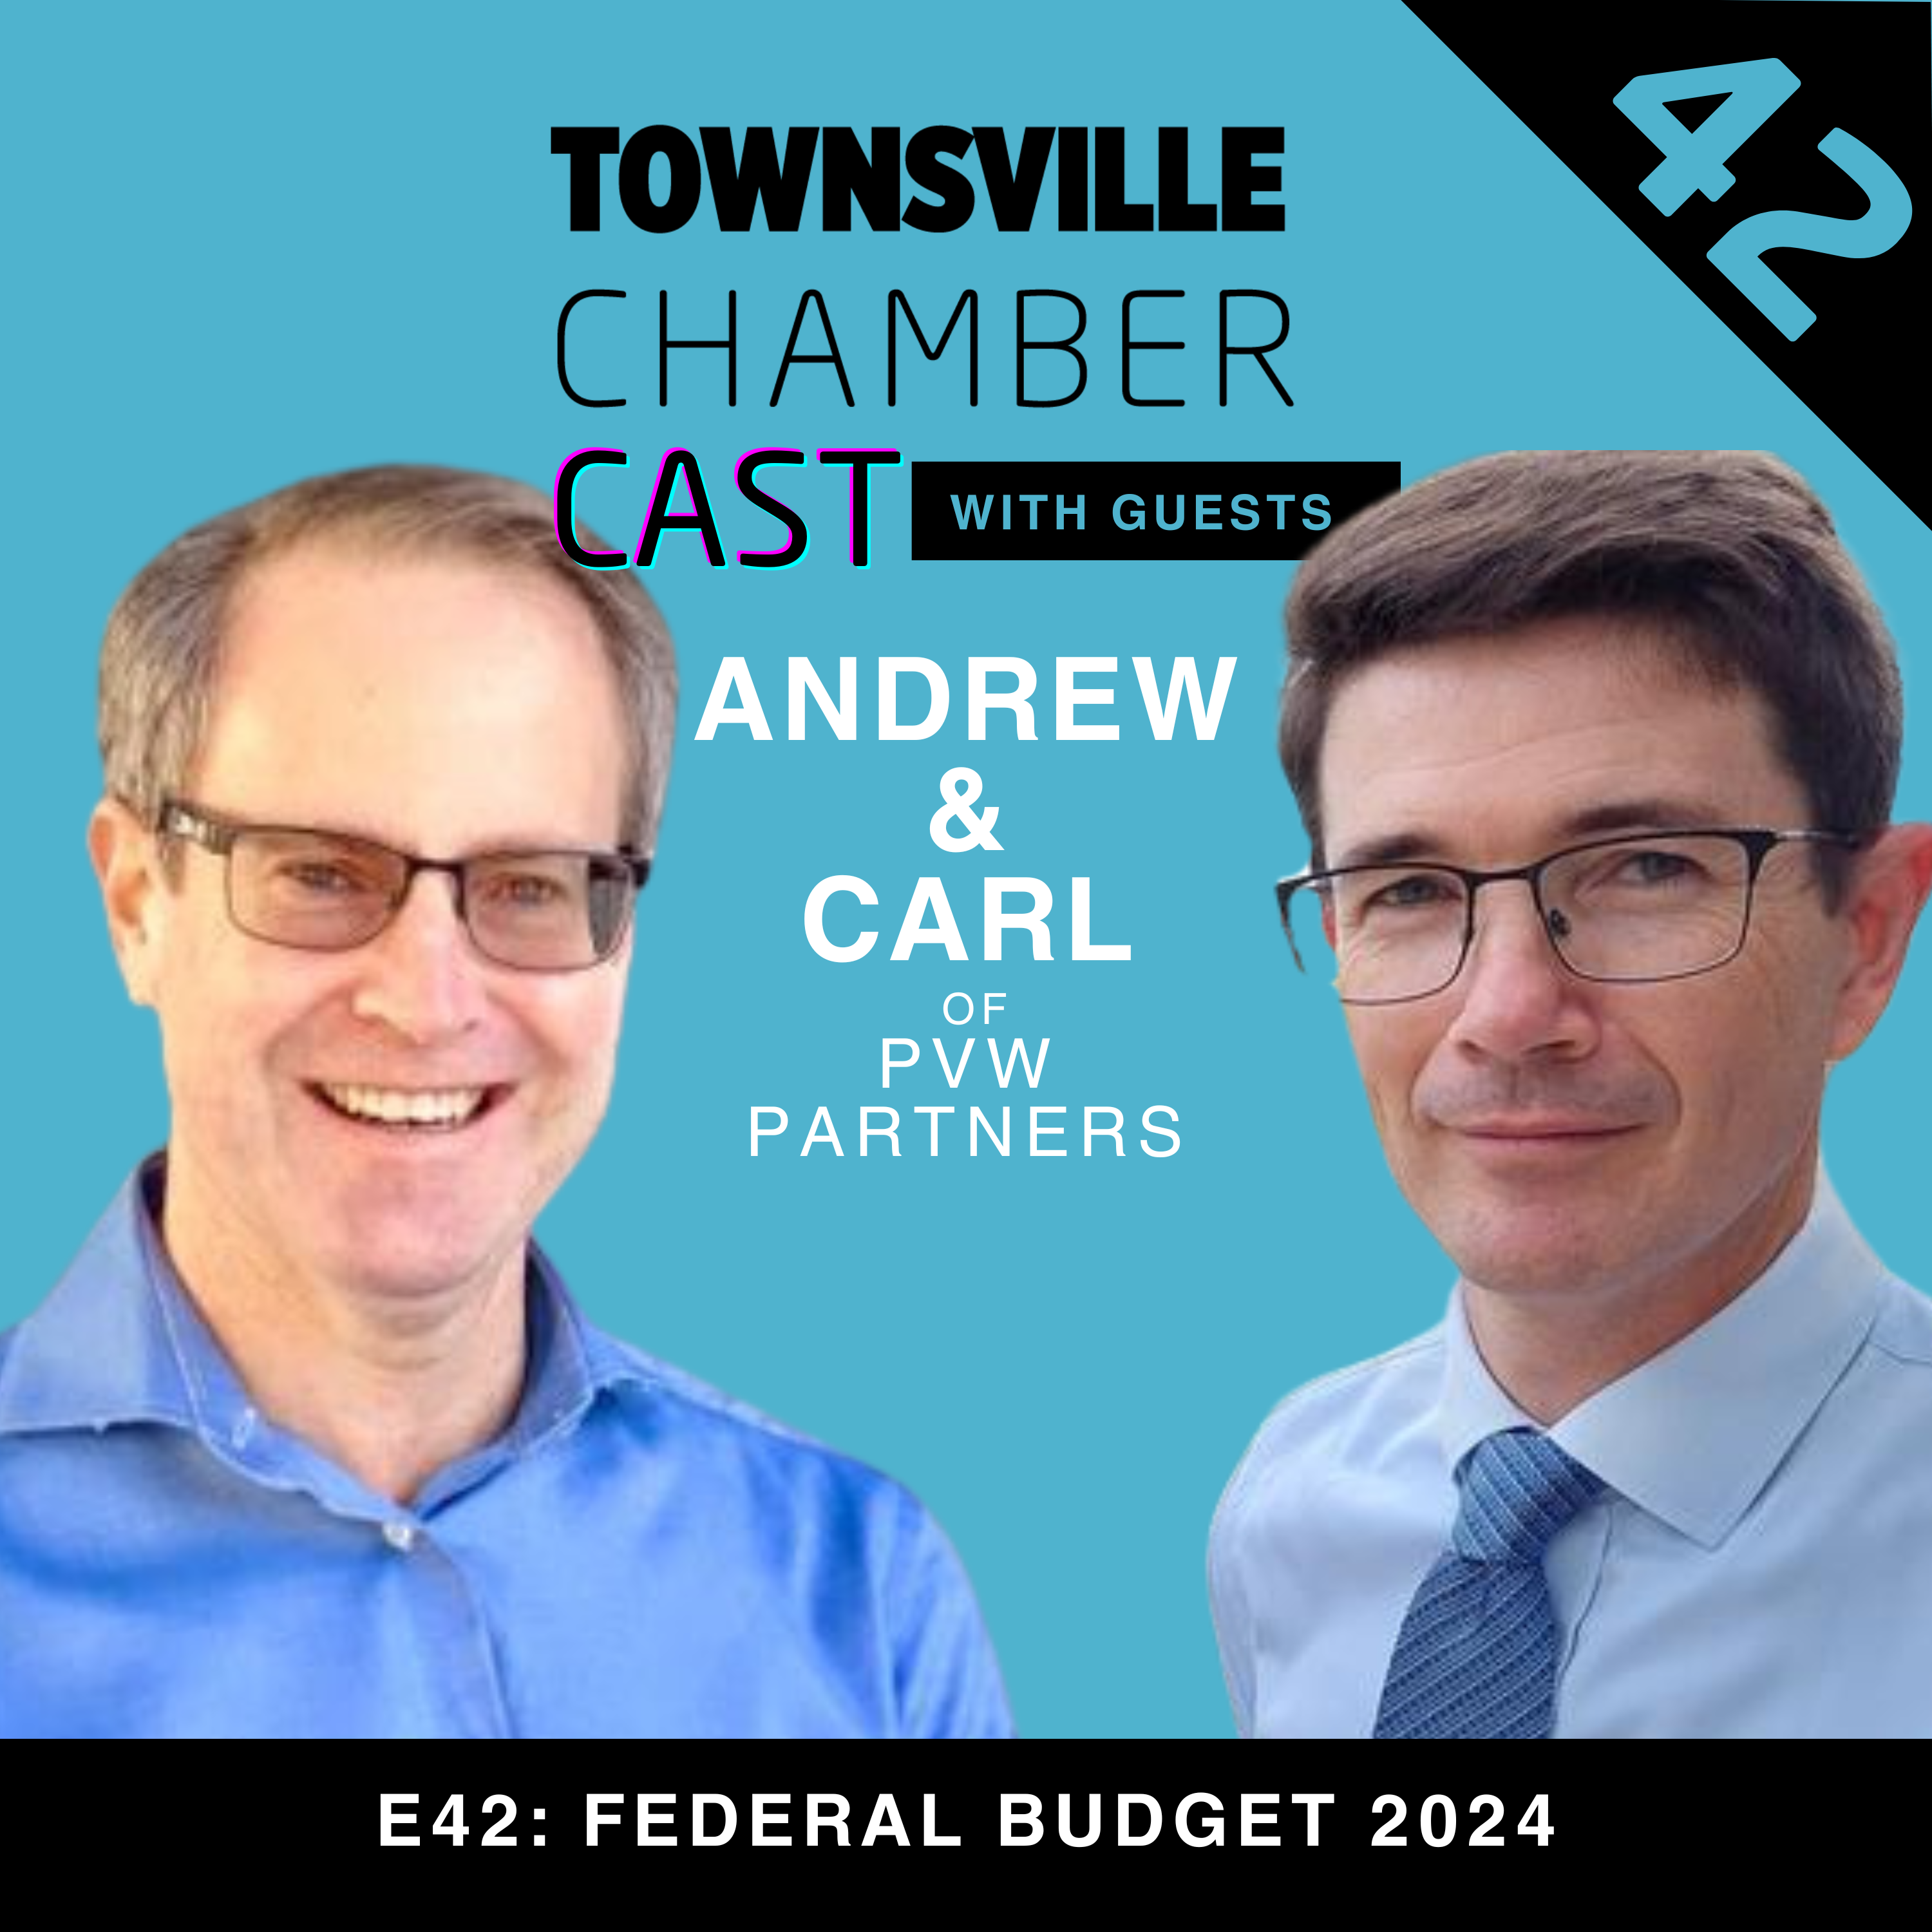 Federal Budget 2024 with PVW Partners Andrew Whitehead and Carl Valentine